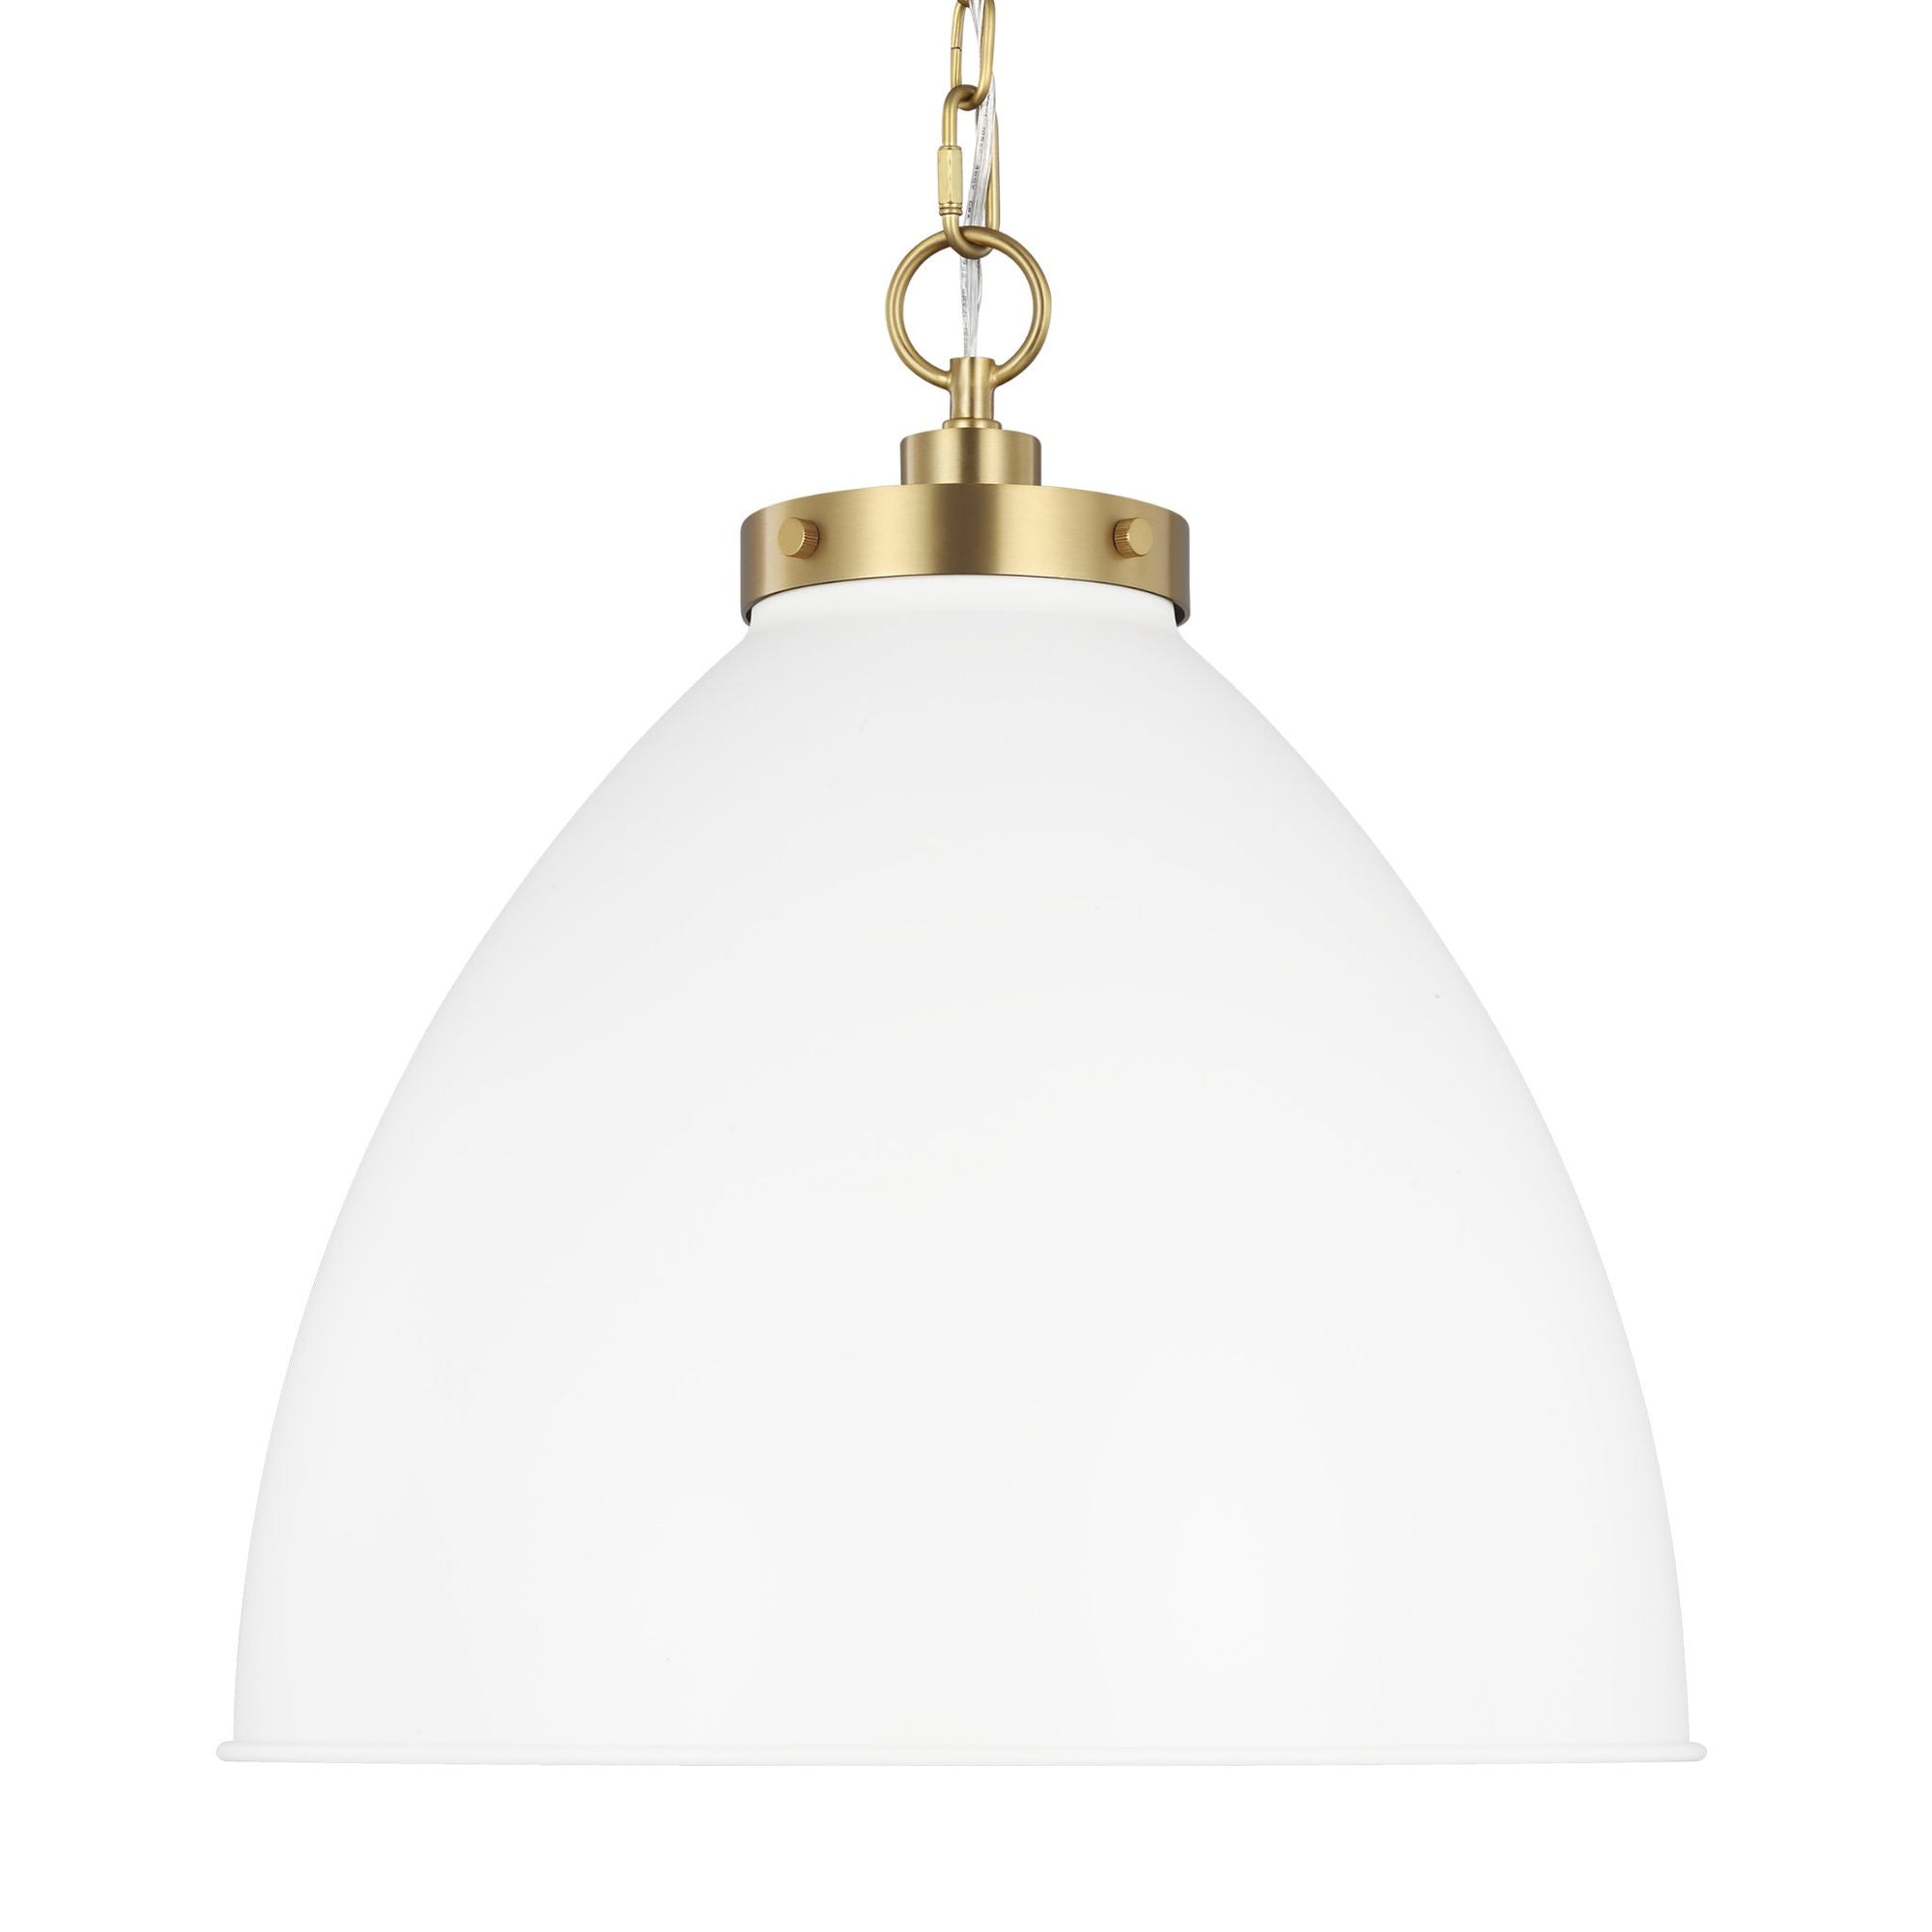 Chapman & Myers Wellfleet Large Dome Pendant in Matte White and Burnished Brass